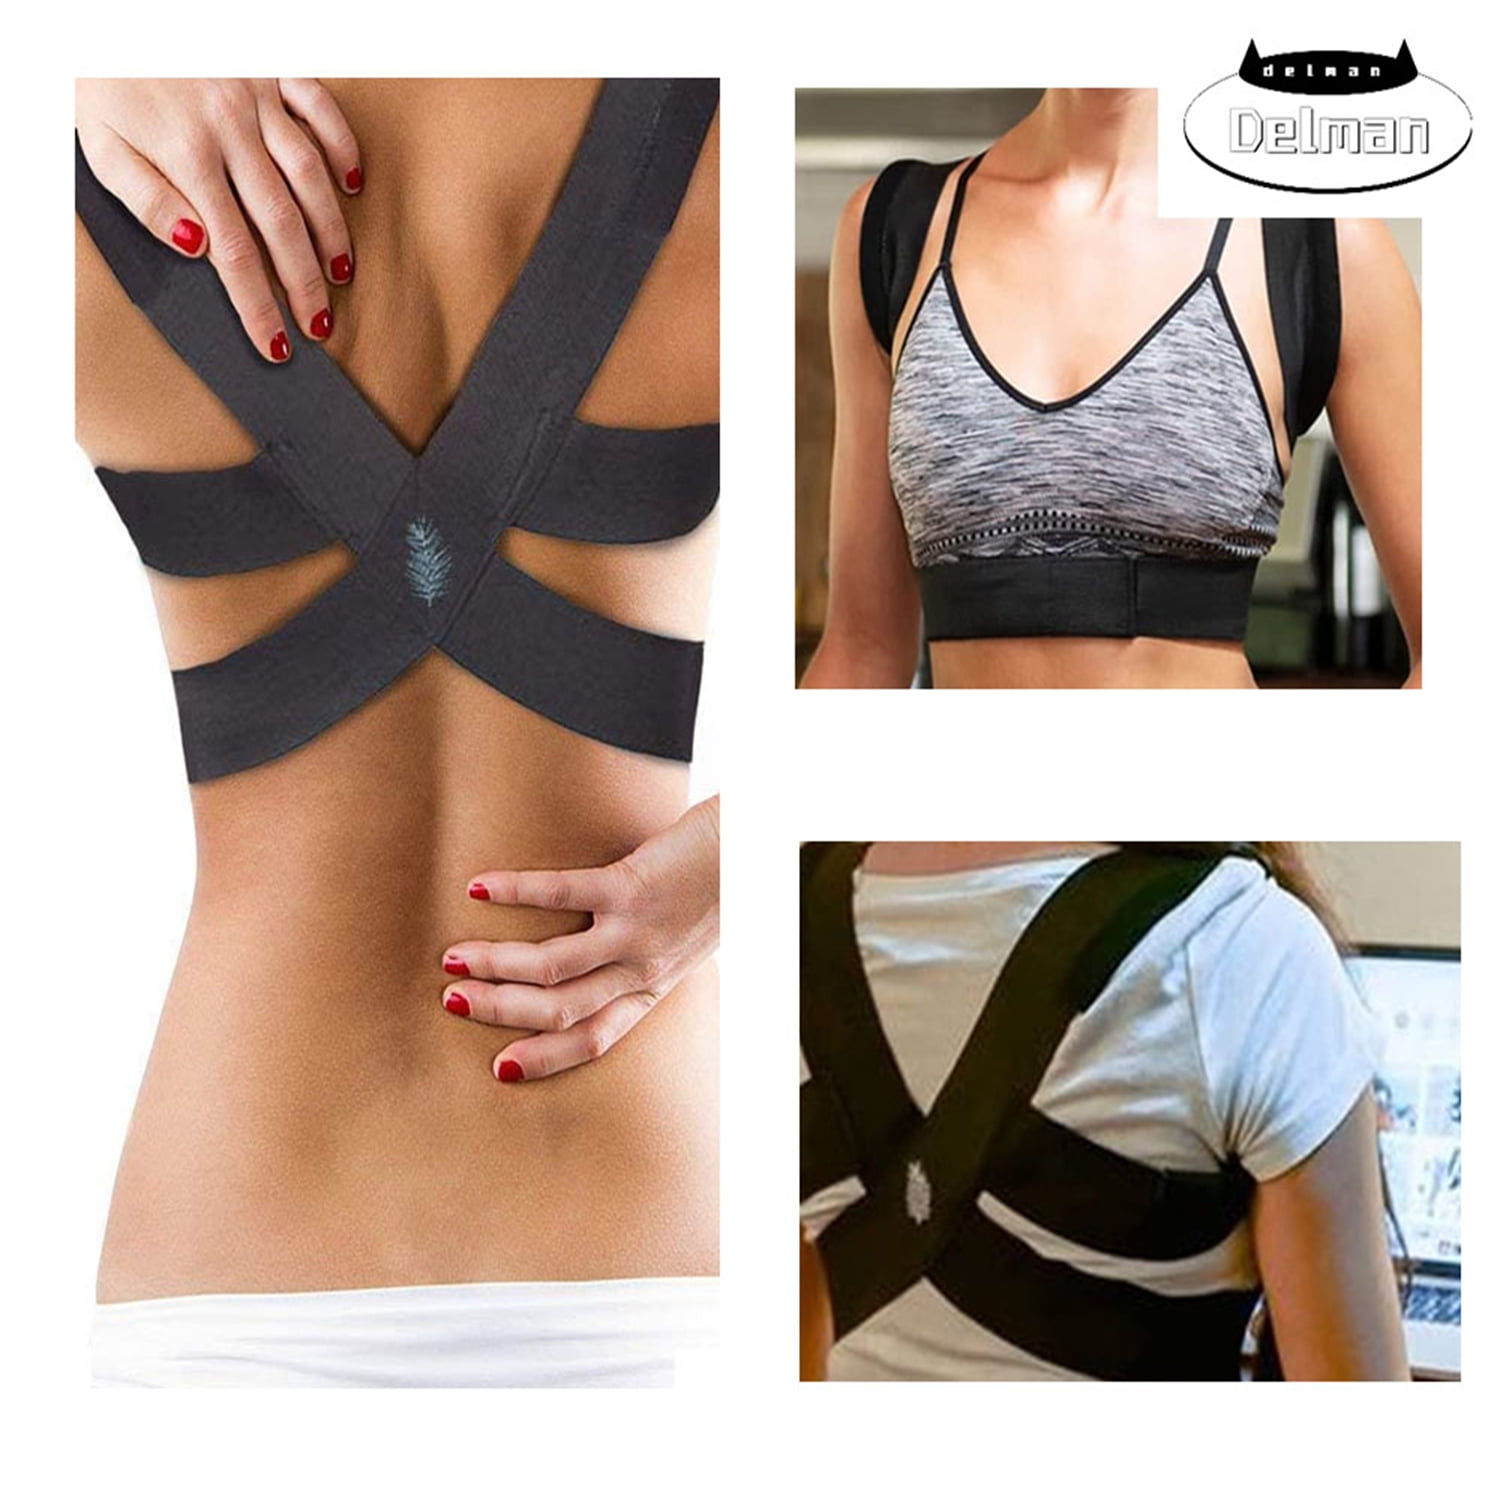  Posture Corrector - Fully Adjustable Breathable Clavicle Chest Back  Support Brace for Improves Posture & Provide Lumbar Support Back Pain  Relief - Perfect for Men & Women - X Small 